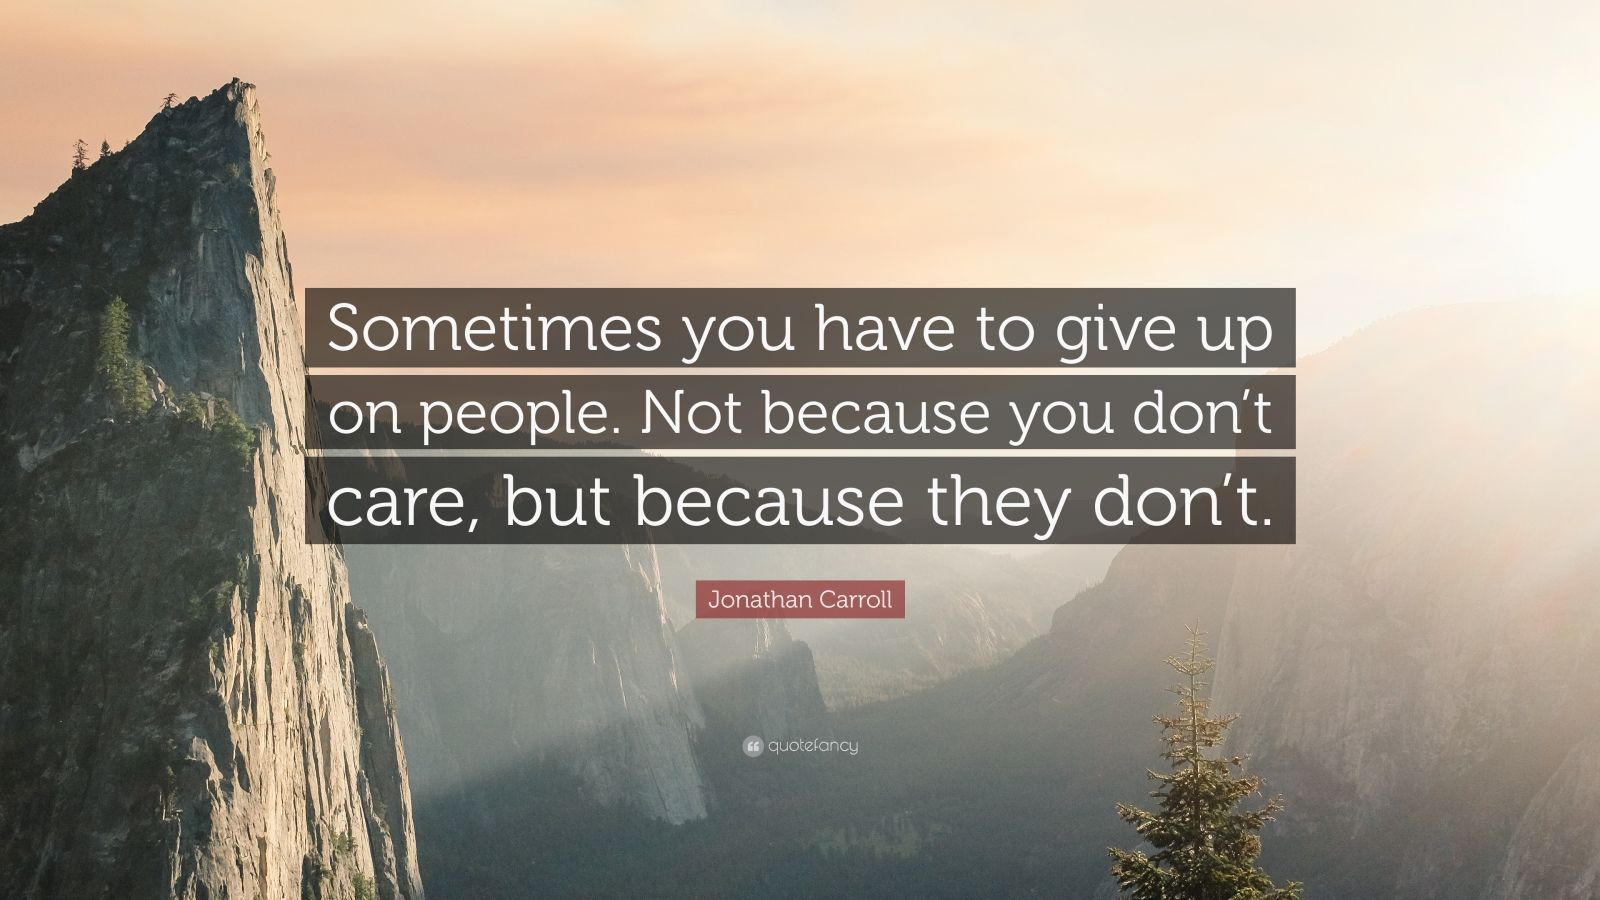 Jonathan Carroll Quote: “Sometimes you have to give up on people. Not ...